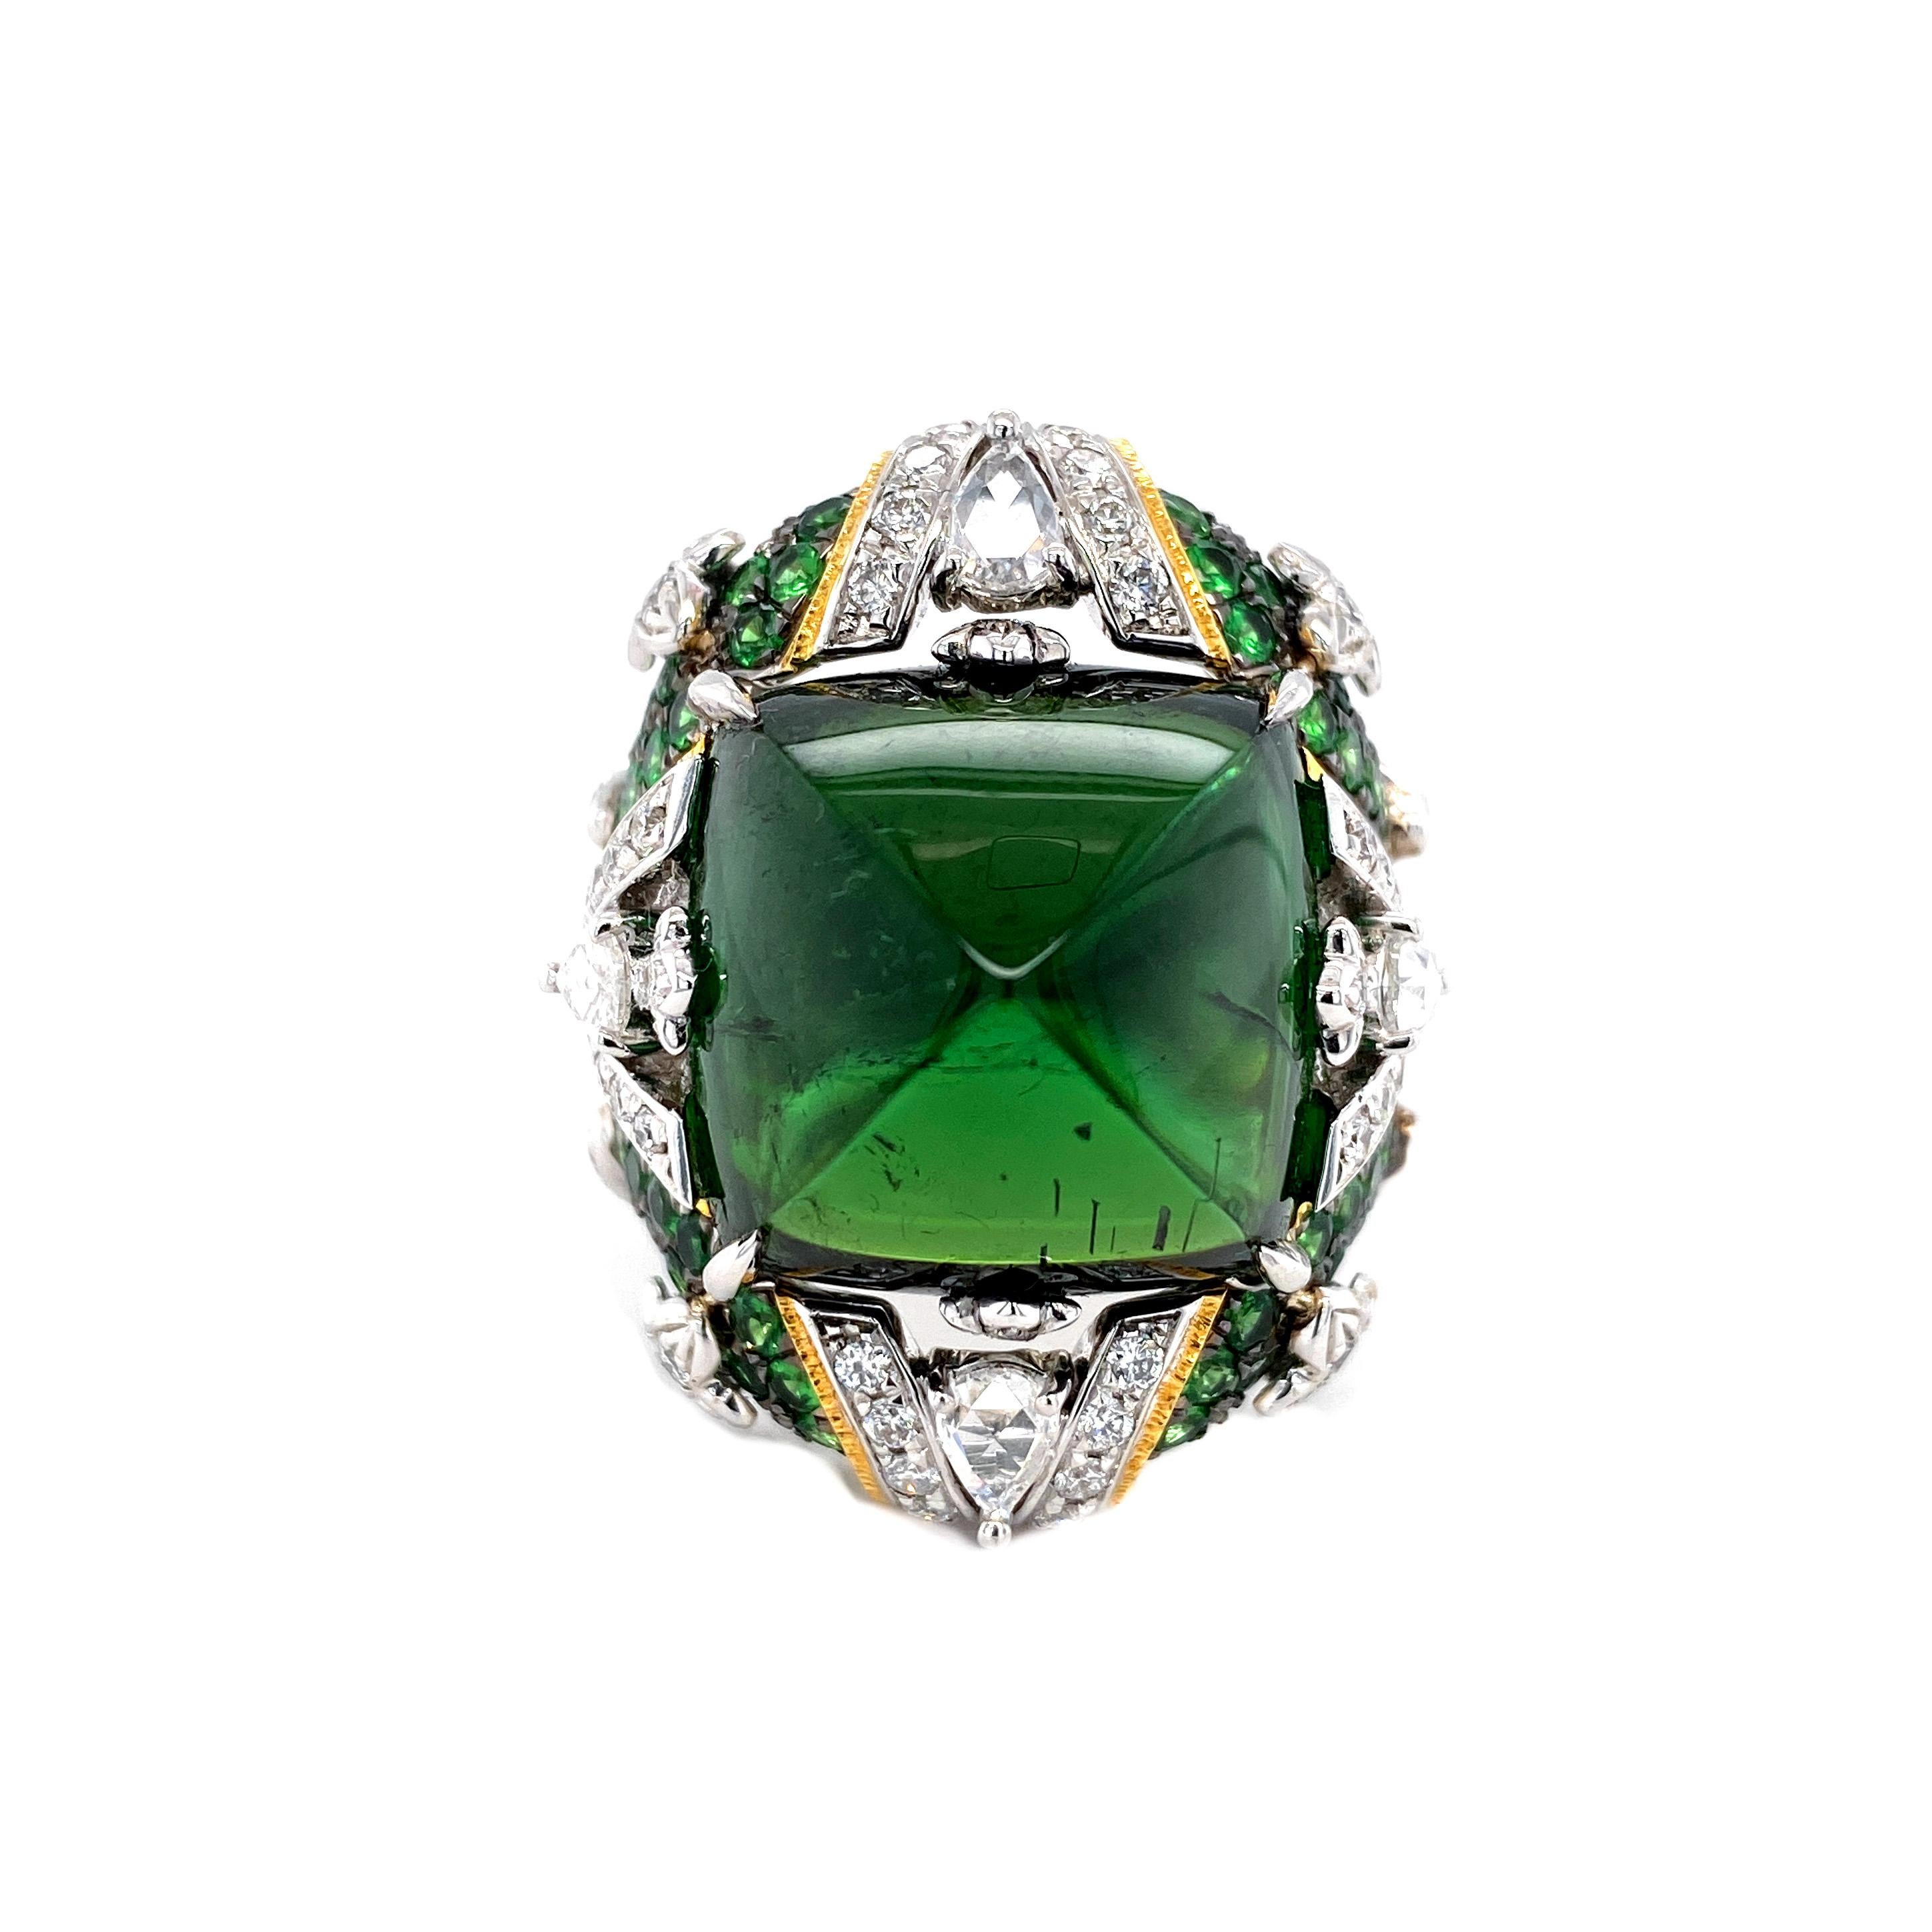 A very rare find with an exquisite transformable design, featuring the ring jacket, unique to Dilys' High Jewellery.  

1 GRS Certified Unheated Green Tourmaline in Sugarloaf Cut, totalling 24.82cts. 
76 Green Garnets, totalling 1.98cts.
70